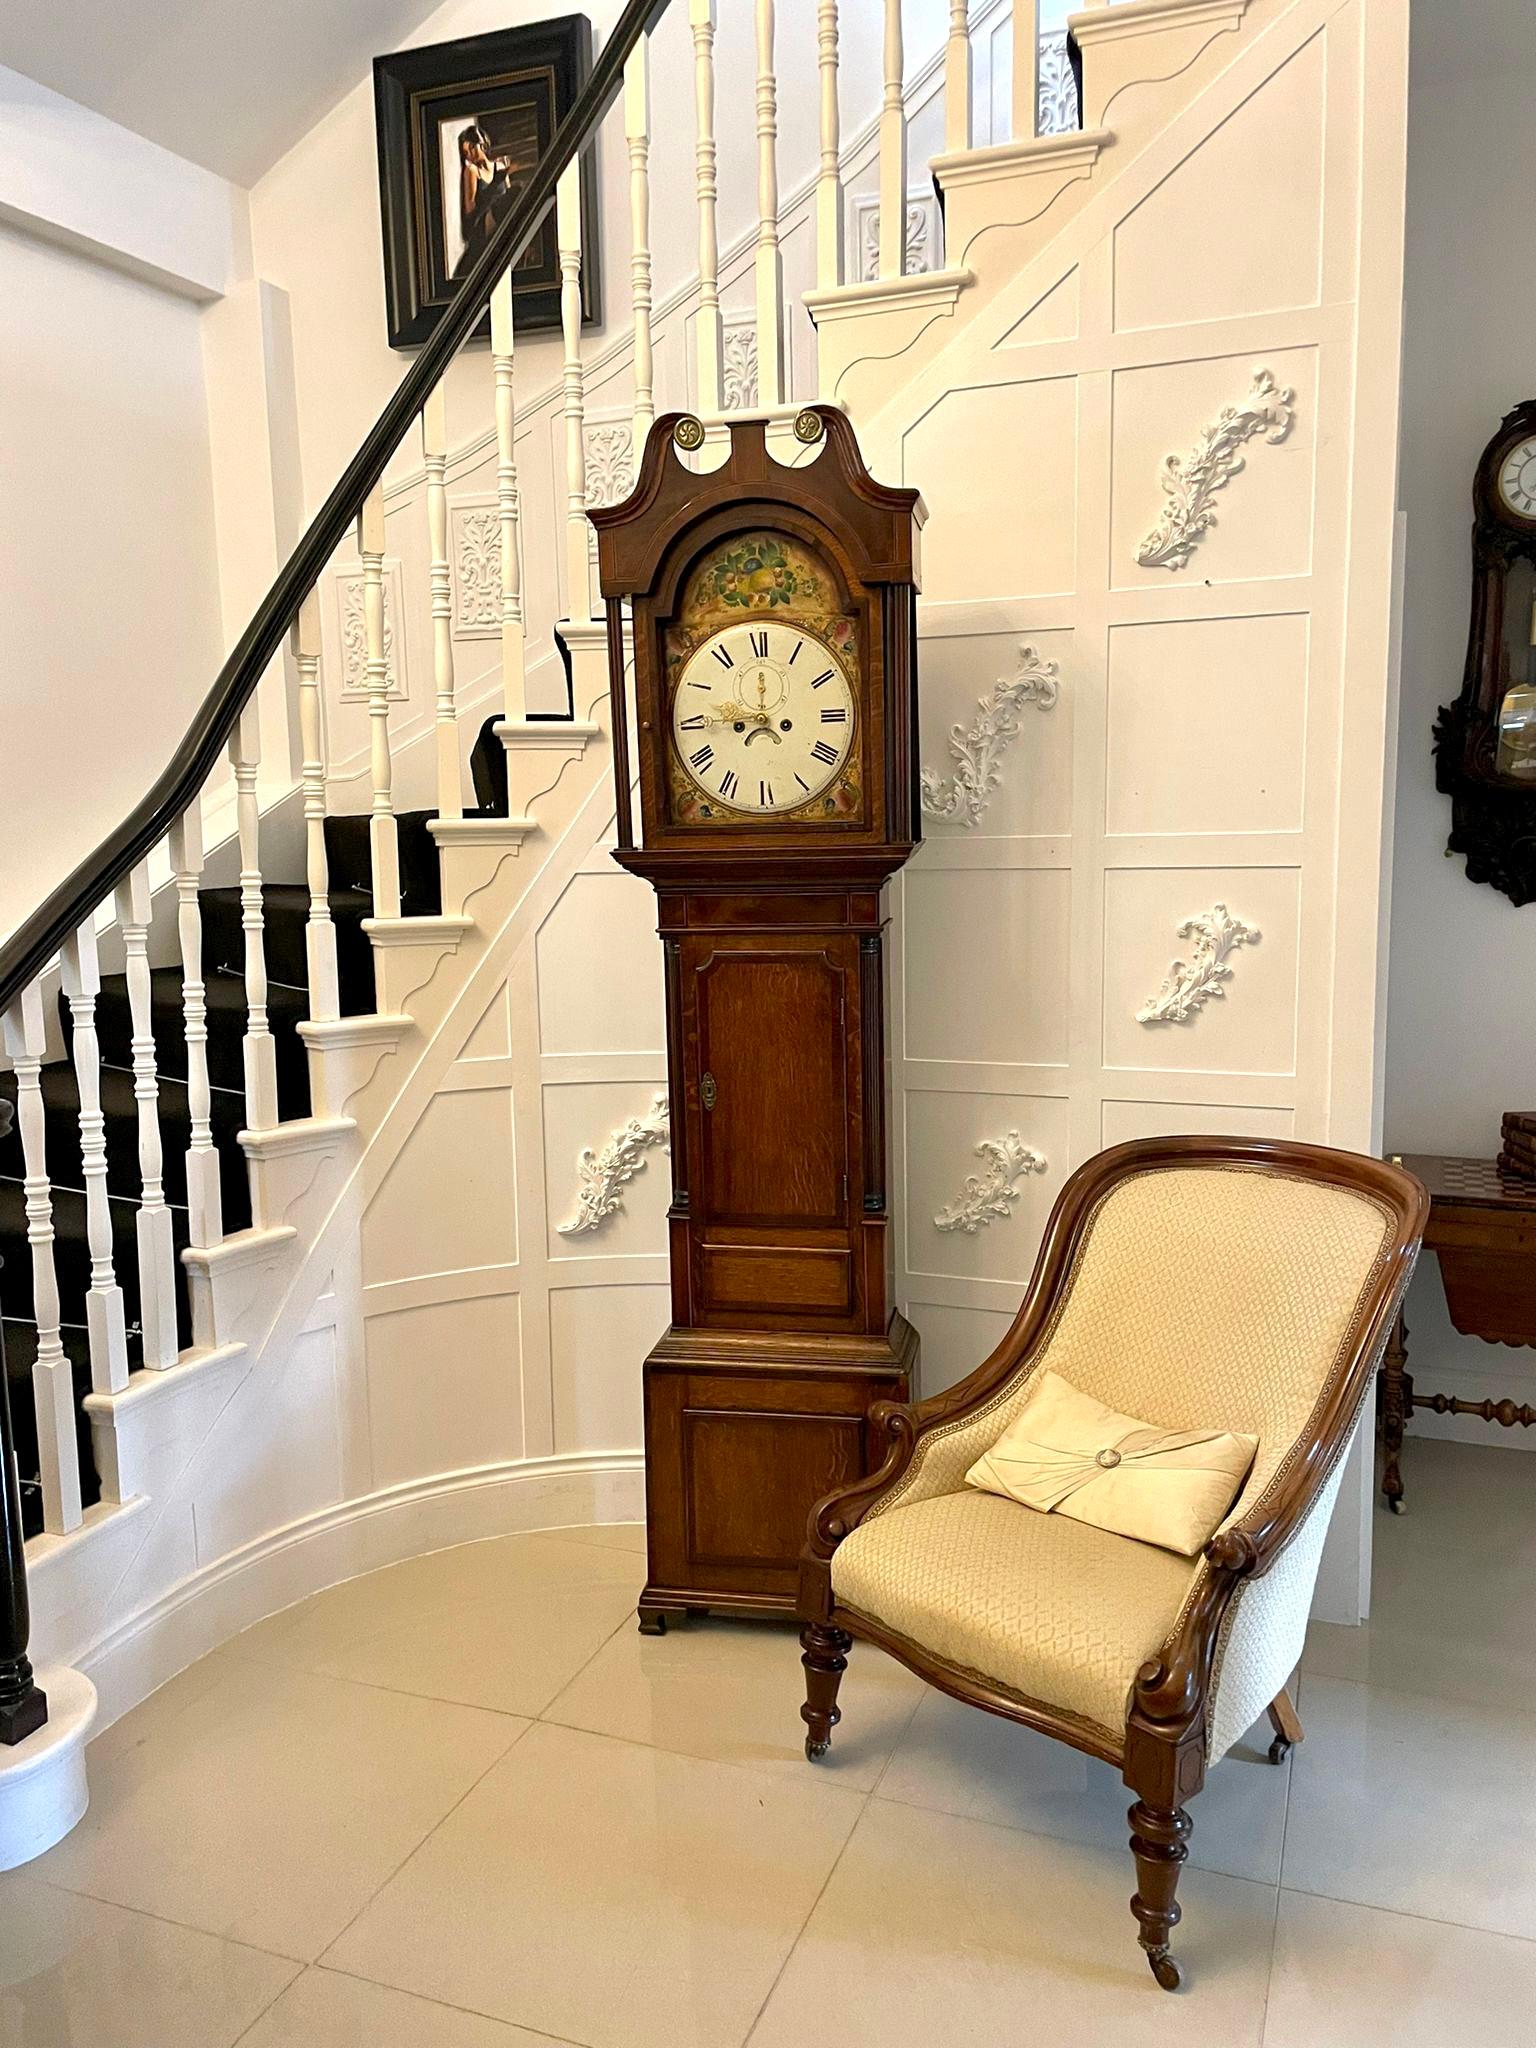 Antique George III quality oak and mahogany 8 day painted face longcase clock having a quality oak case crossbanded in mahogany with a swan neck pediment, reeded columns, shaped door to the centre flanked by reeded columns standing on shaped bracket